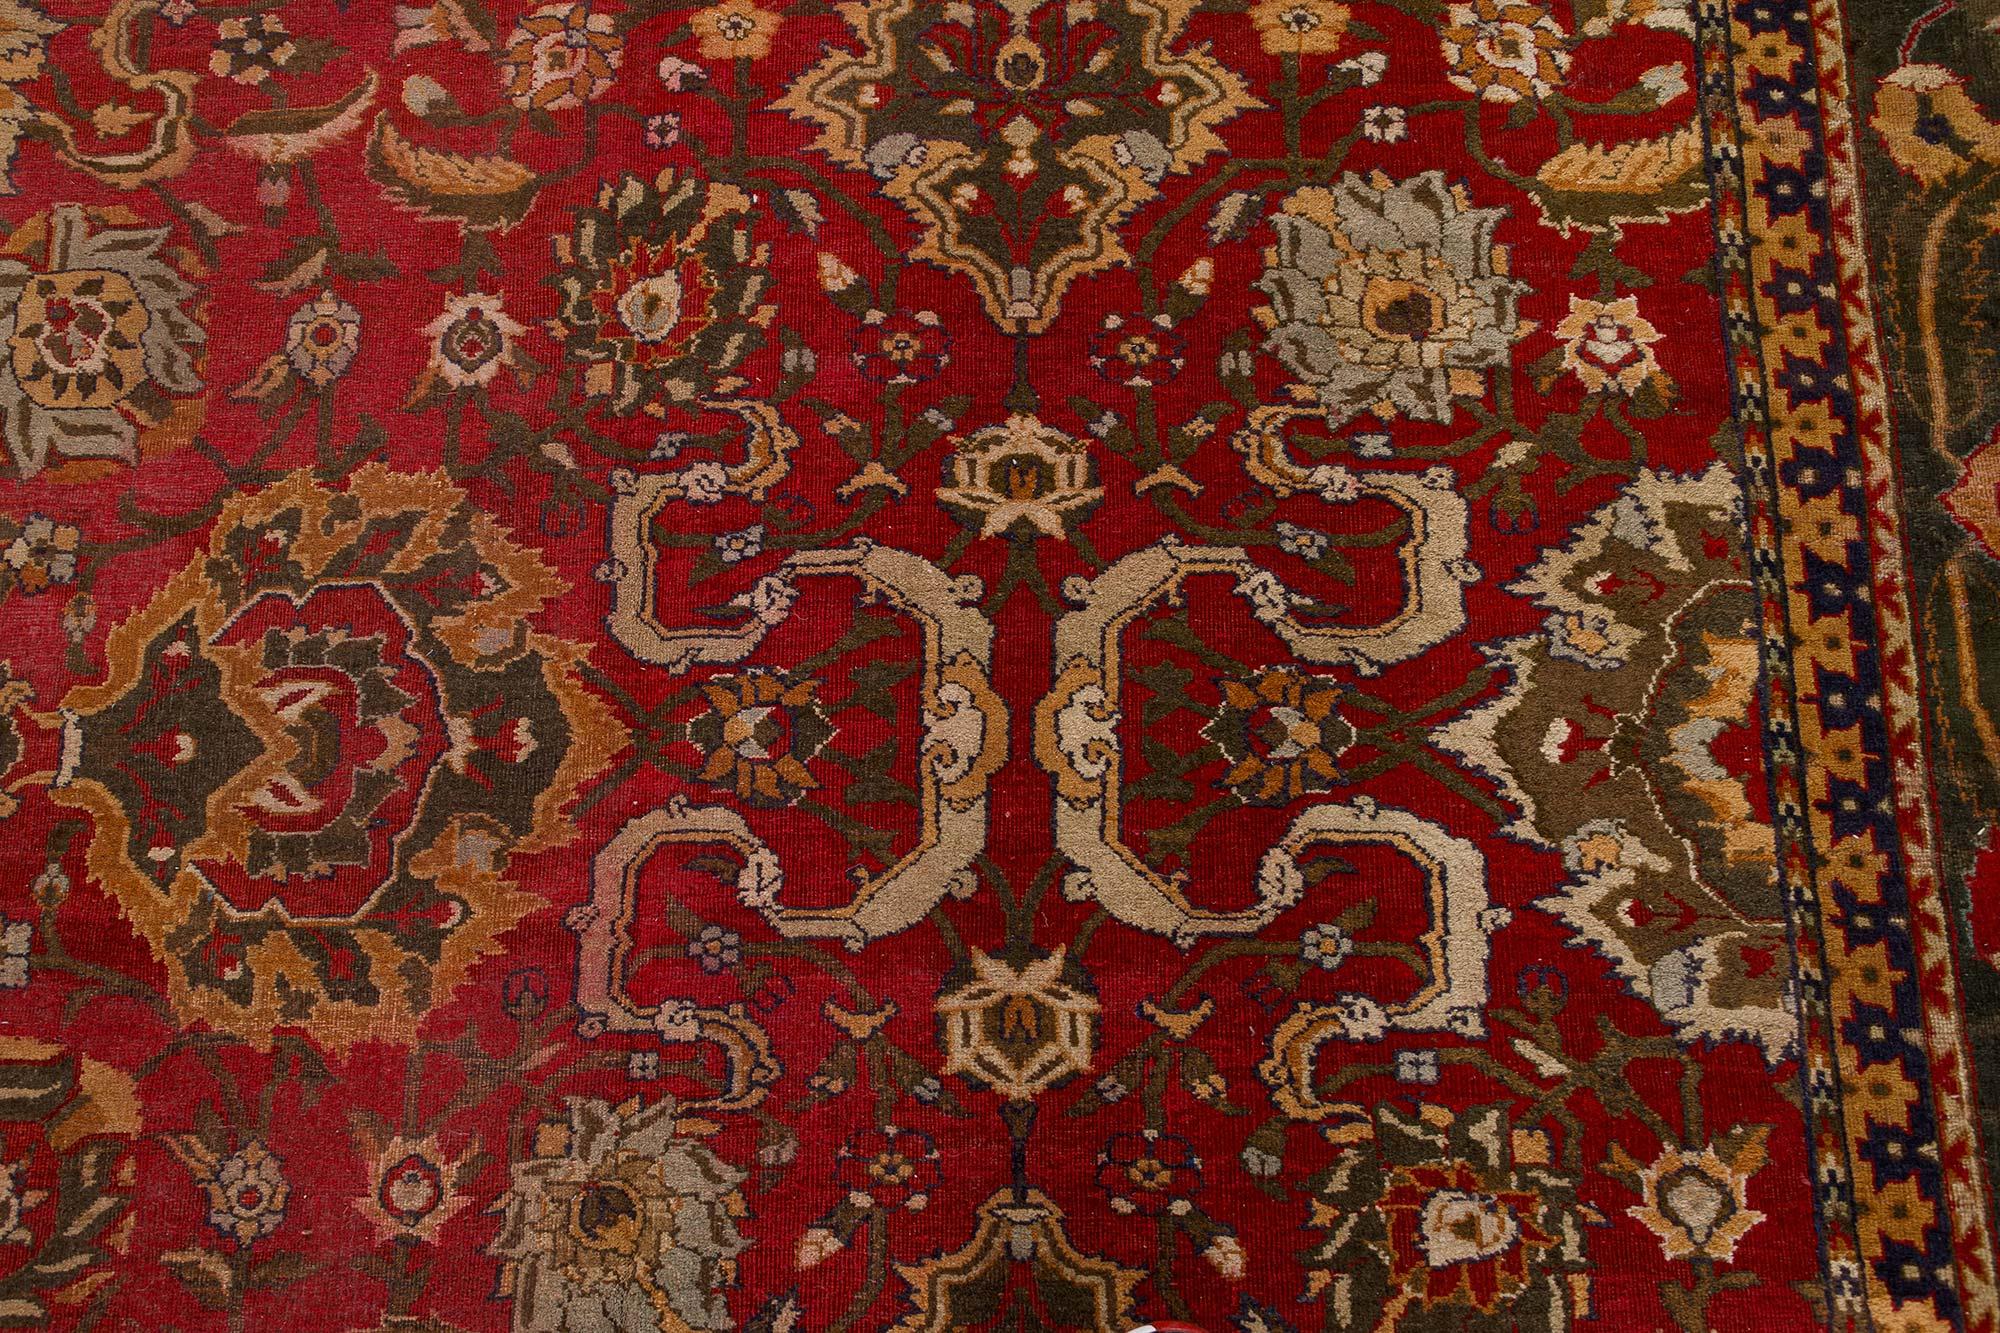 Authentic Indian Agra Bold Red Handmade Wool Carpet
Size: 13'0